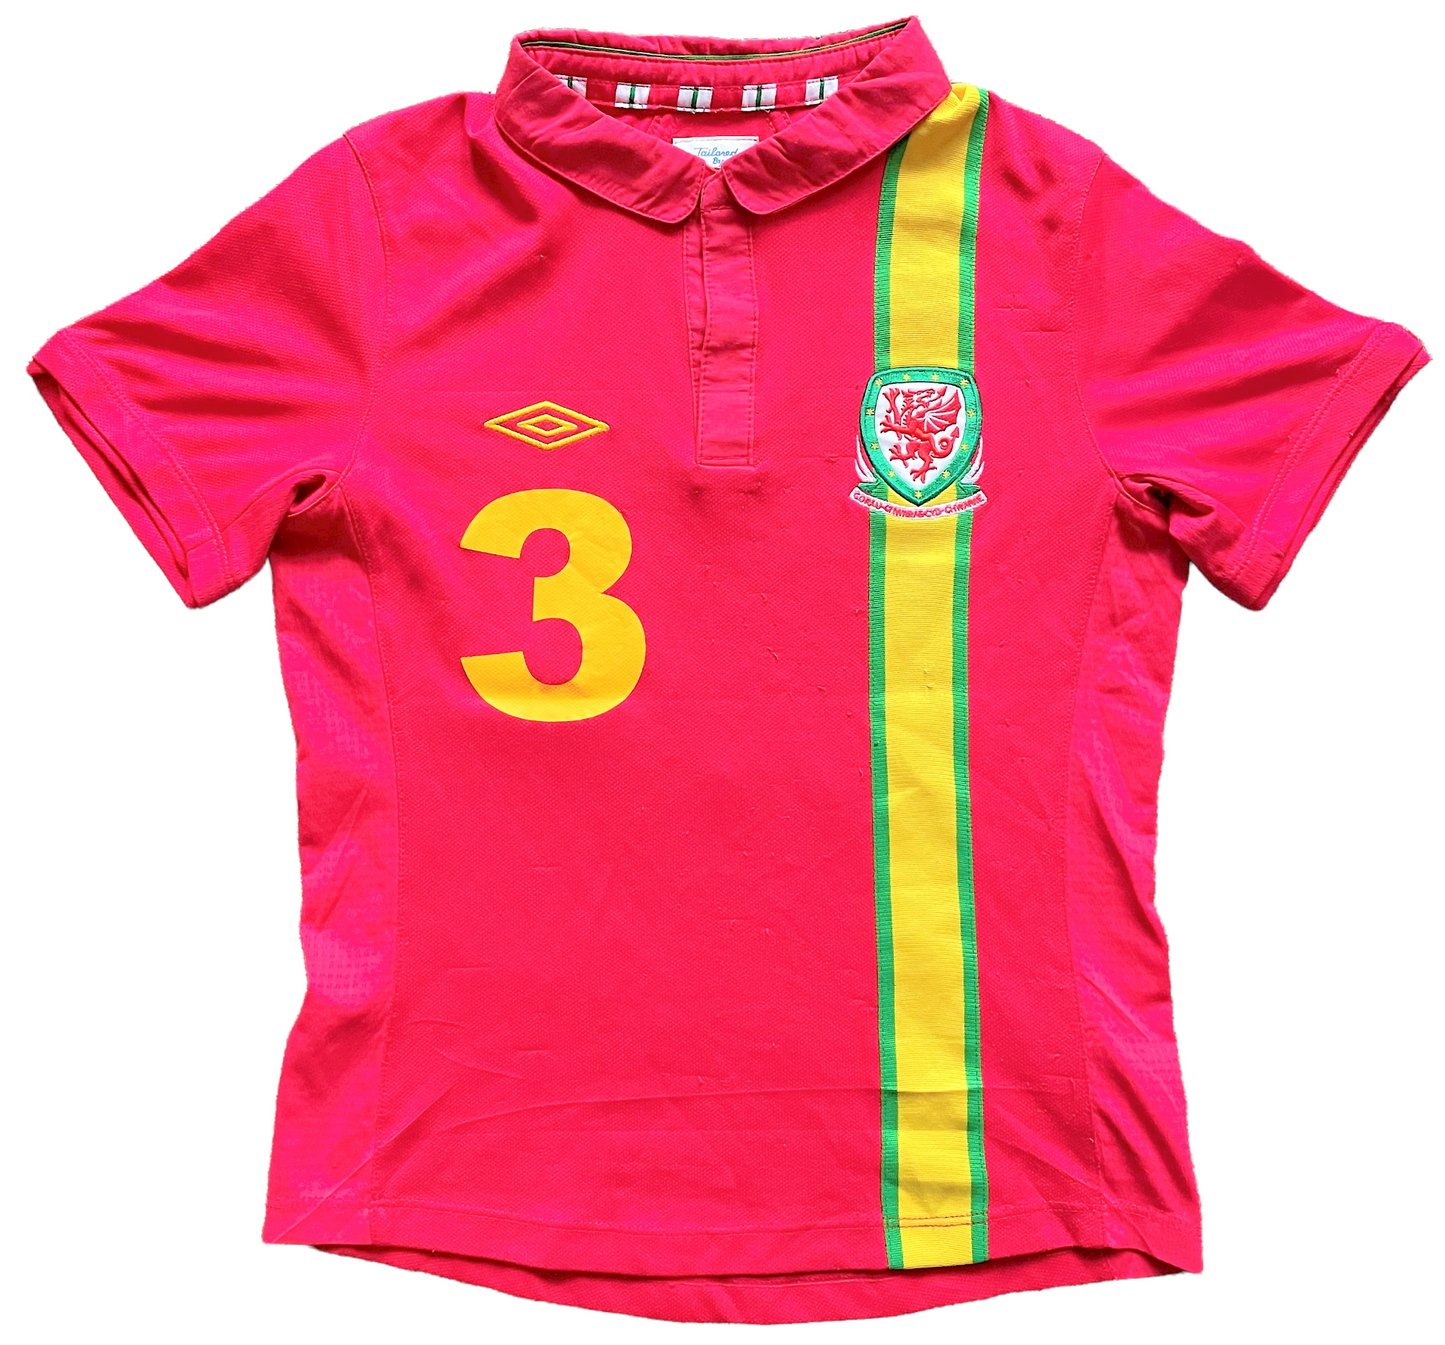 Wales 2012 Home Shirt (very good) Small Boys. Height 18 inches